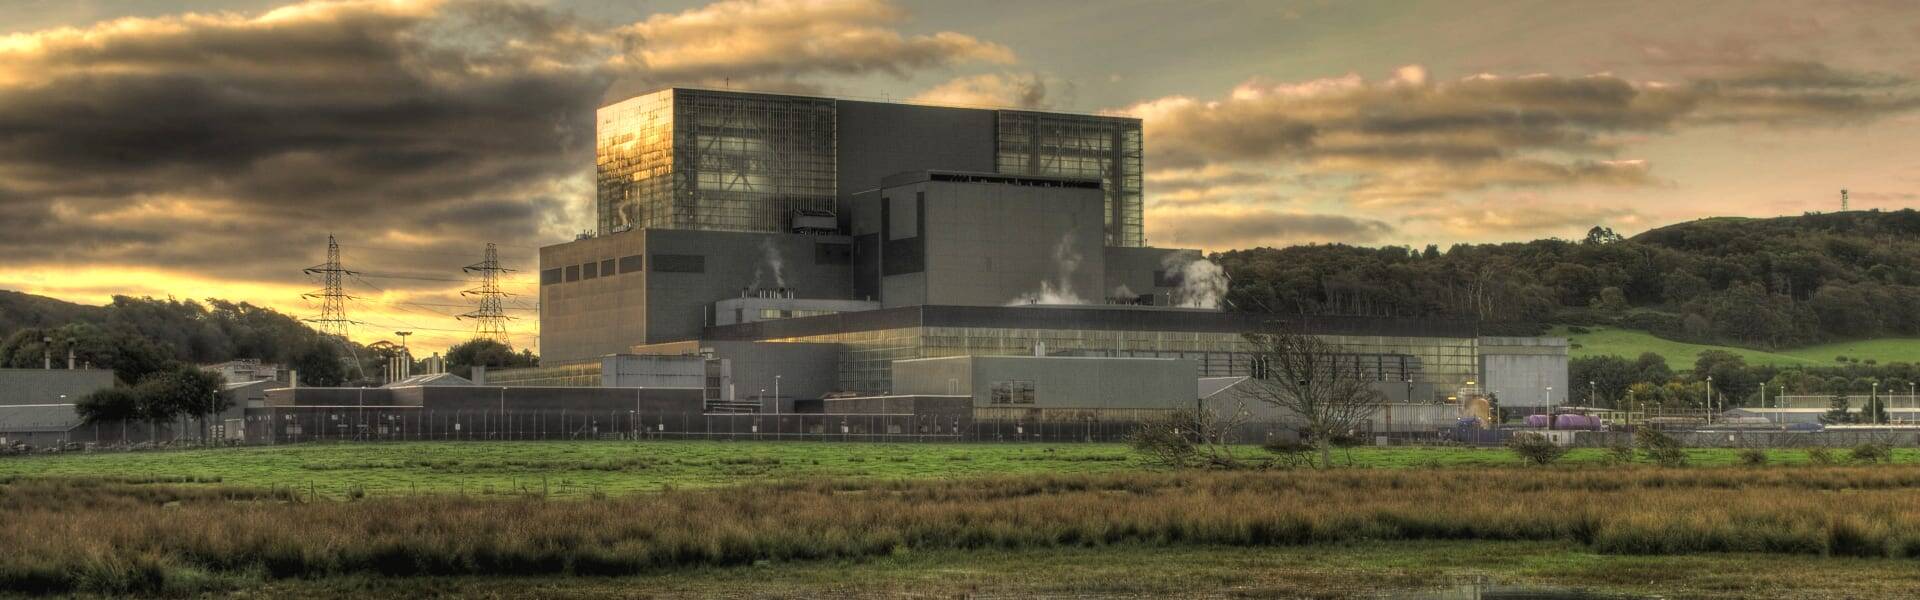 EDF to shut down Hunterston B nuclear plant by January 2022